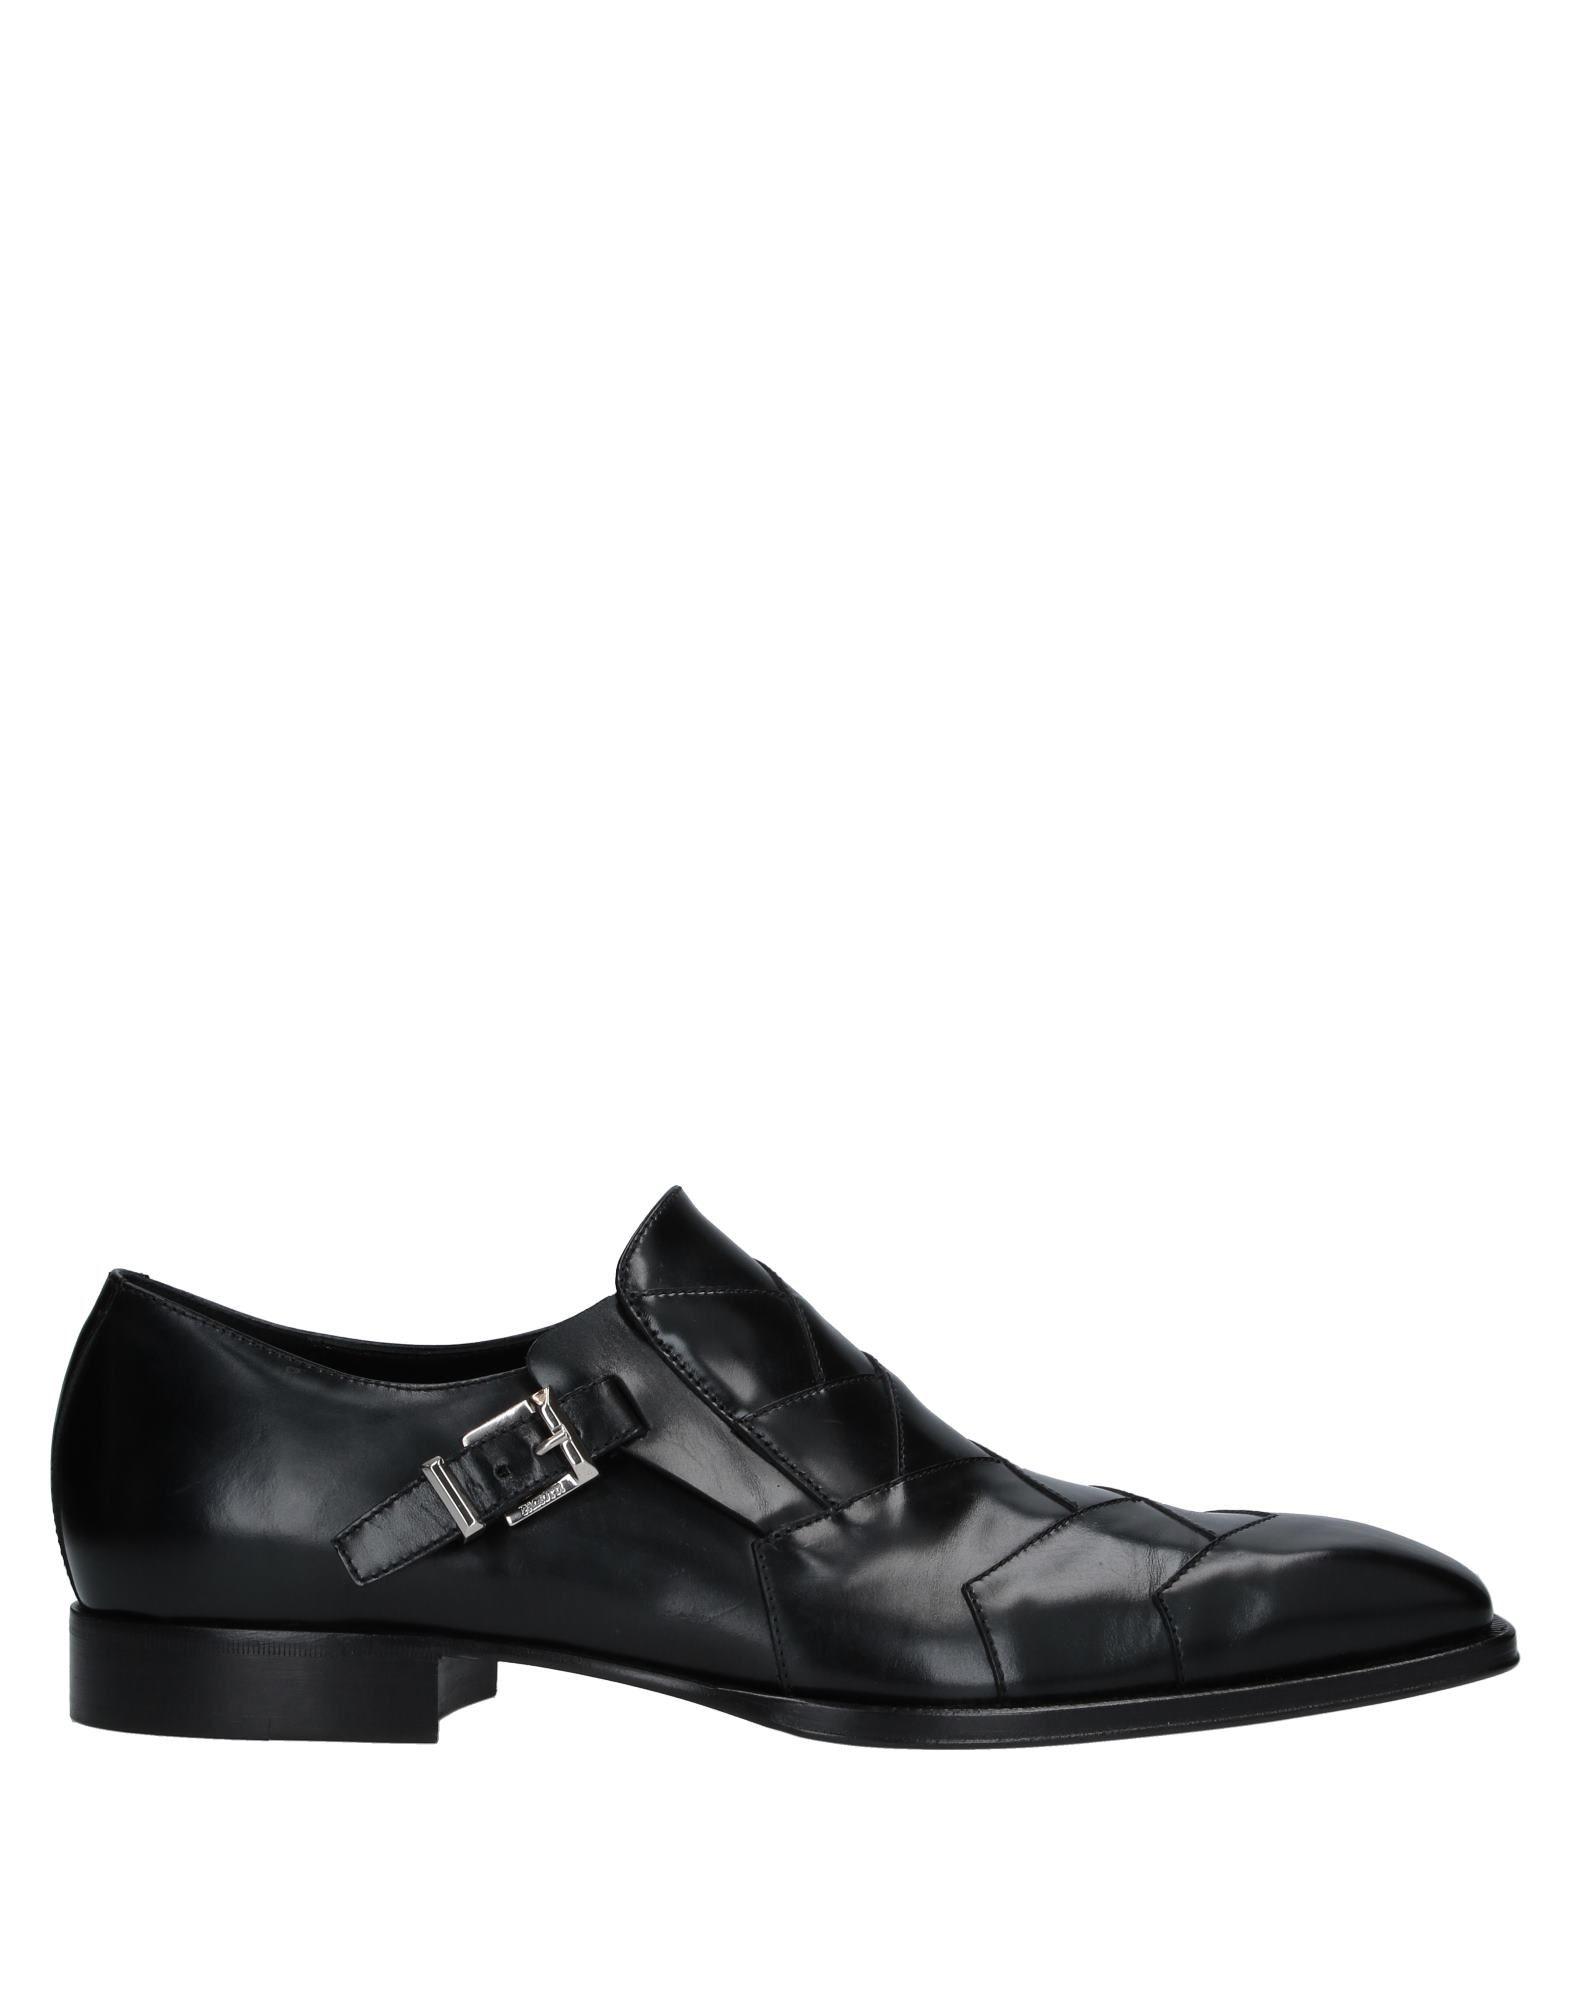 Cesare Paciotti Leather Loafer in Black for Men - Lyst